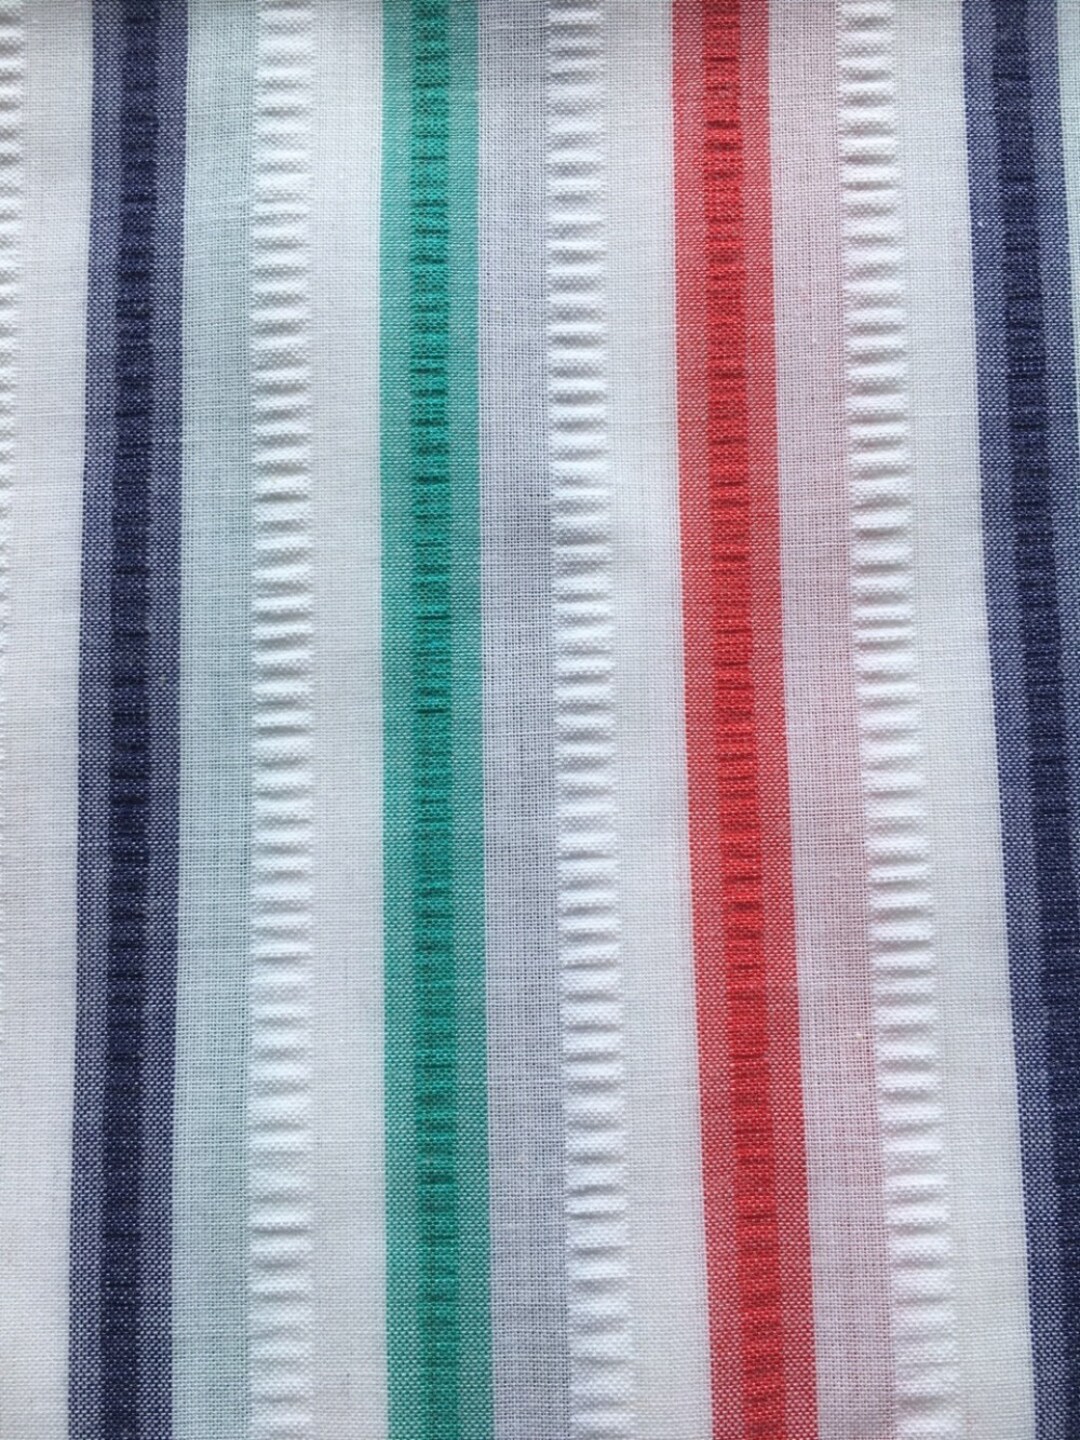 Vintage Multicolored Striped Seersucker Cotton Fabric by the Half